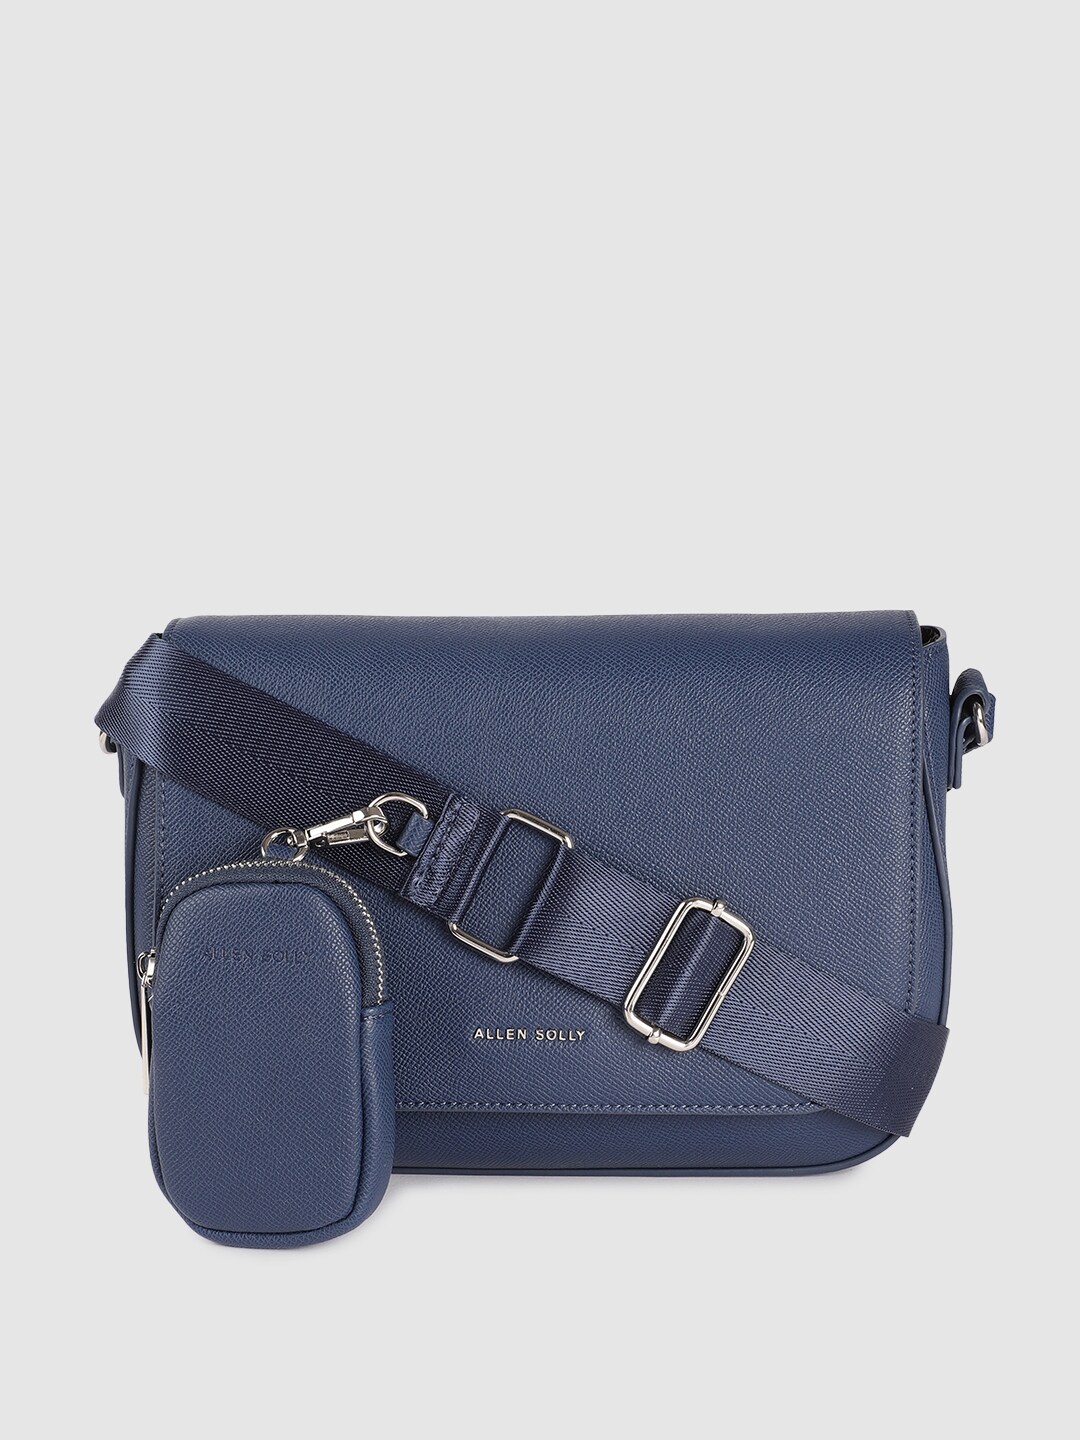 Allen Solly Navy Blue Solid PU Regular Structured Sling Bag with Pouch Price in India